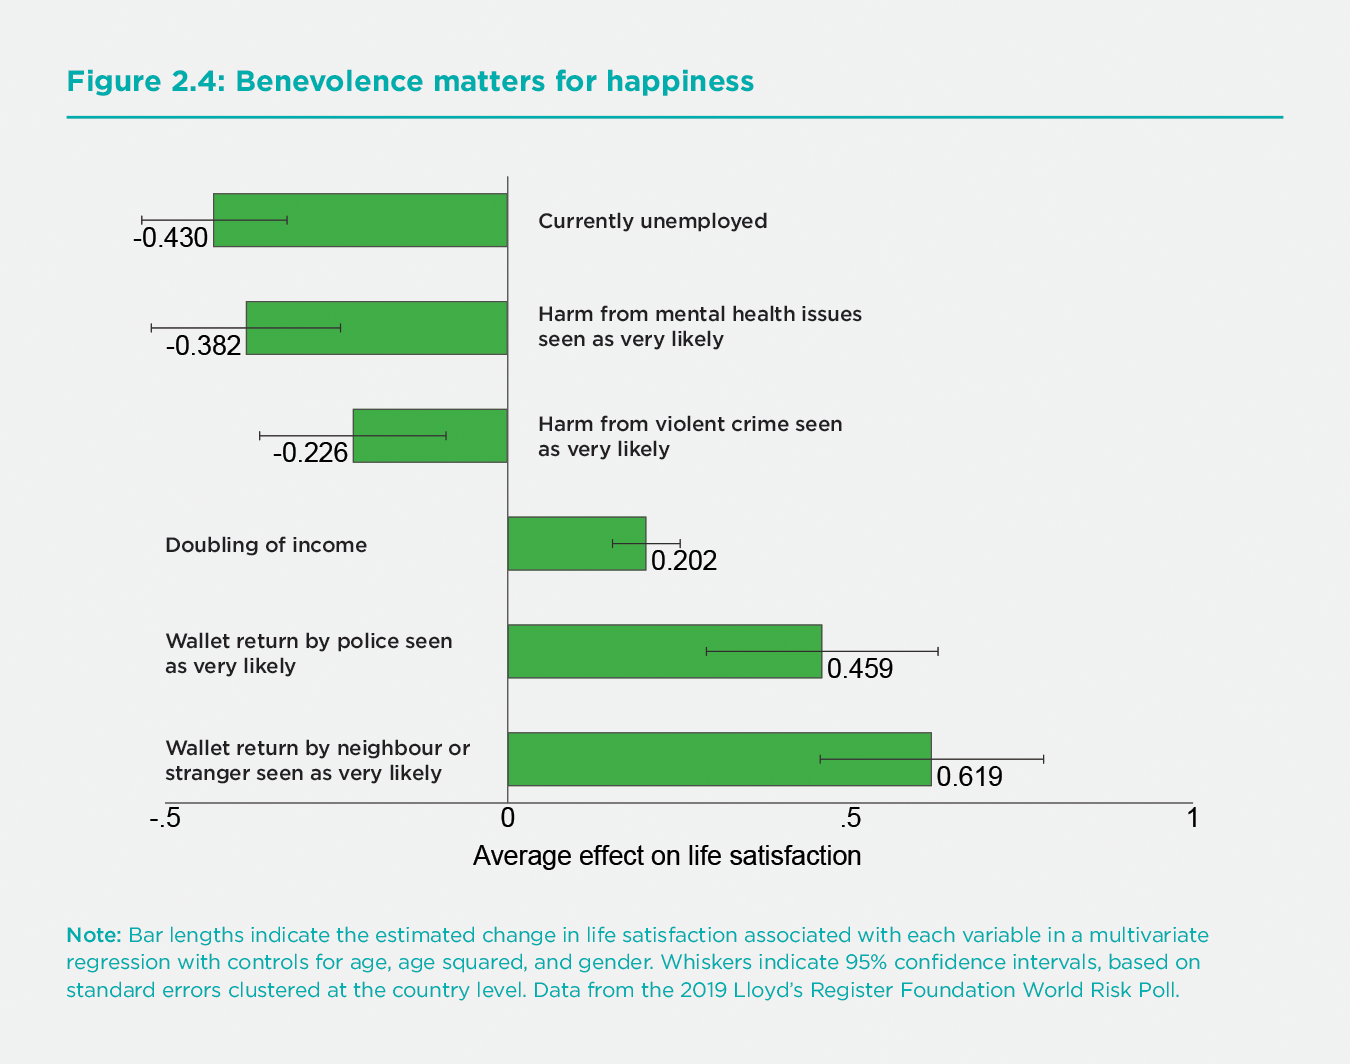 Figure 2.4. Benevolence matters for happiness